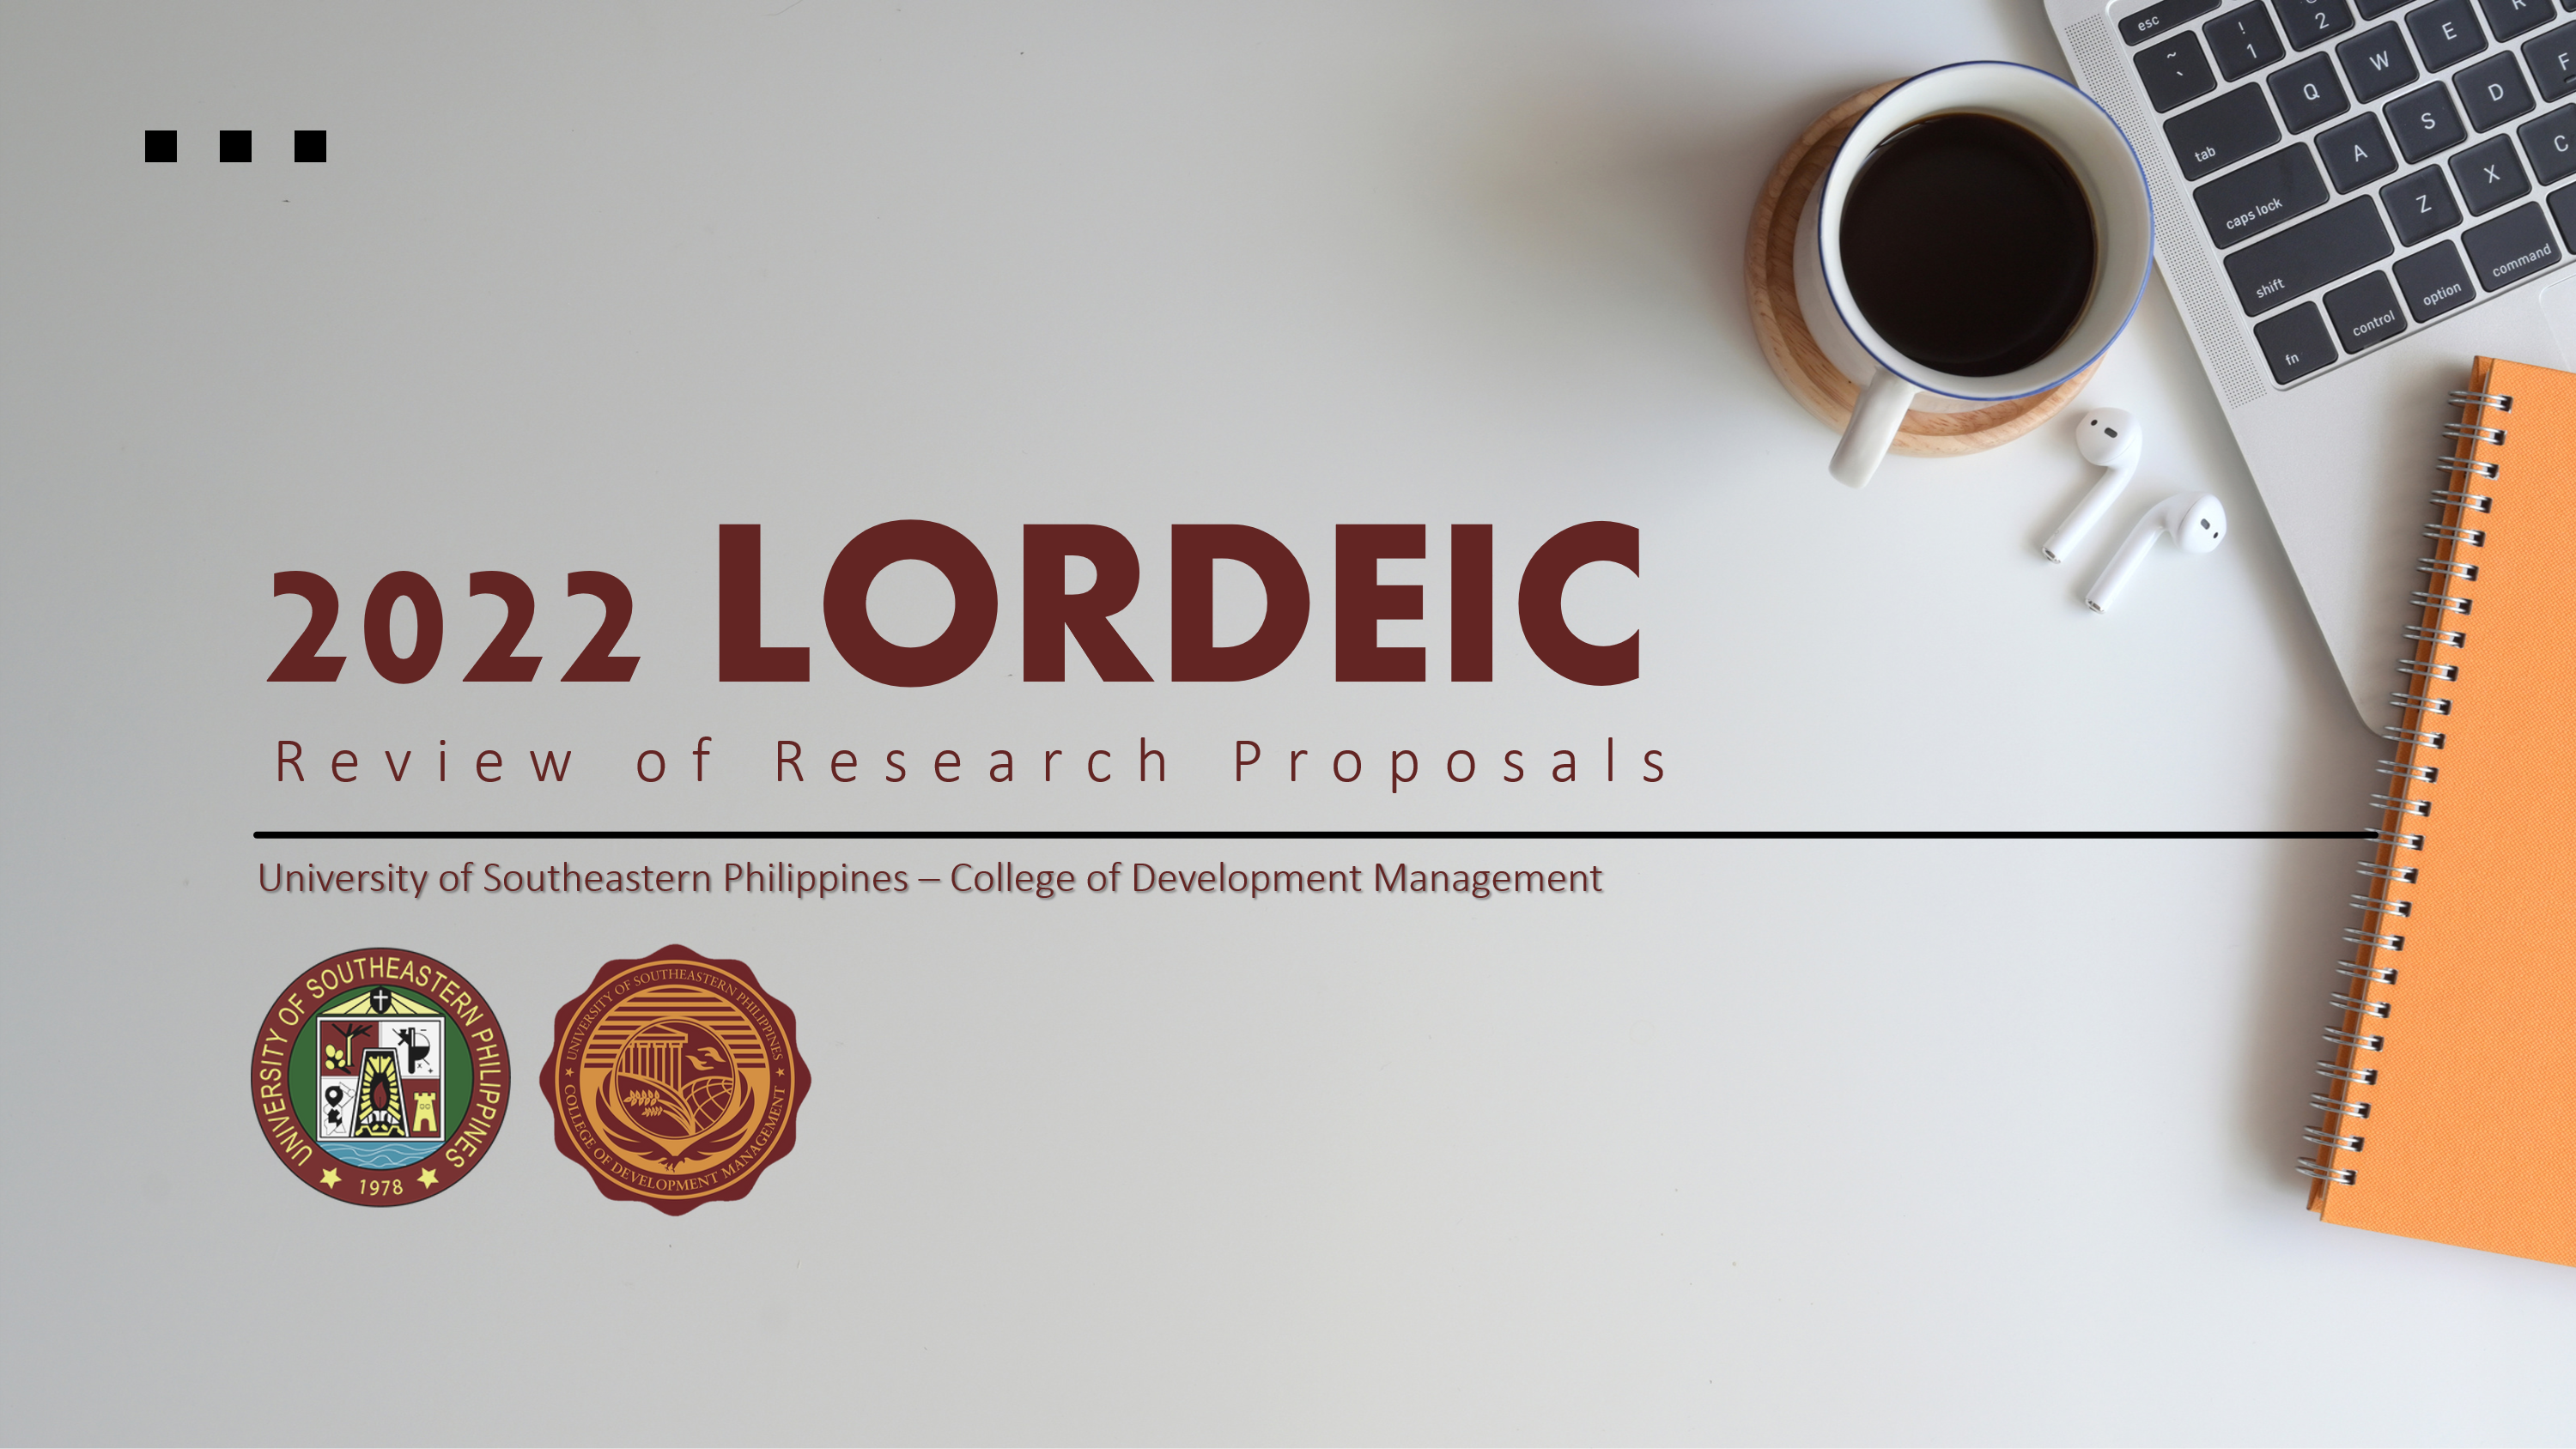 CDM’s Local Research, Development, Extension, and Innovation Committee (LoRDEIC) Review of Research Proposals